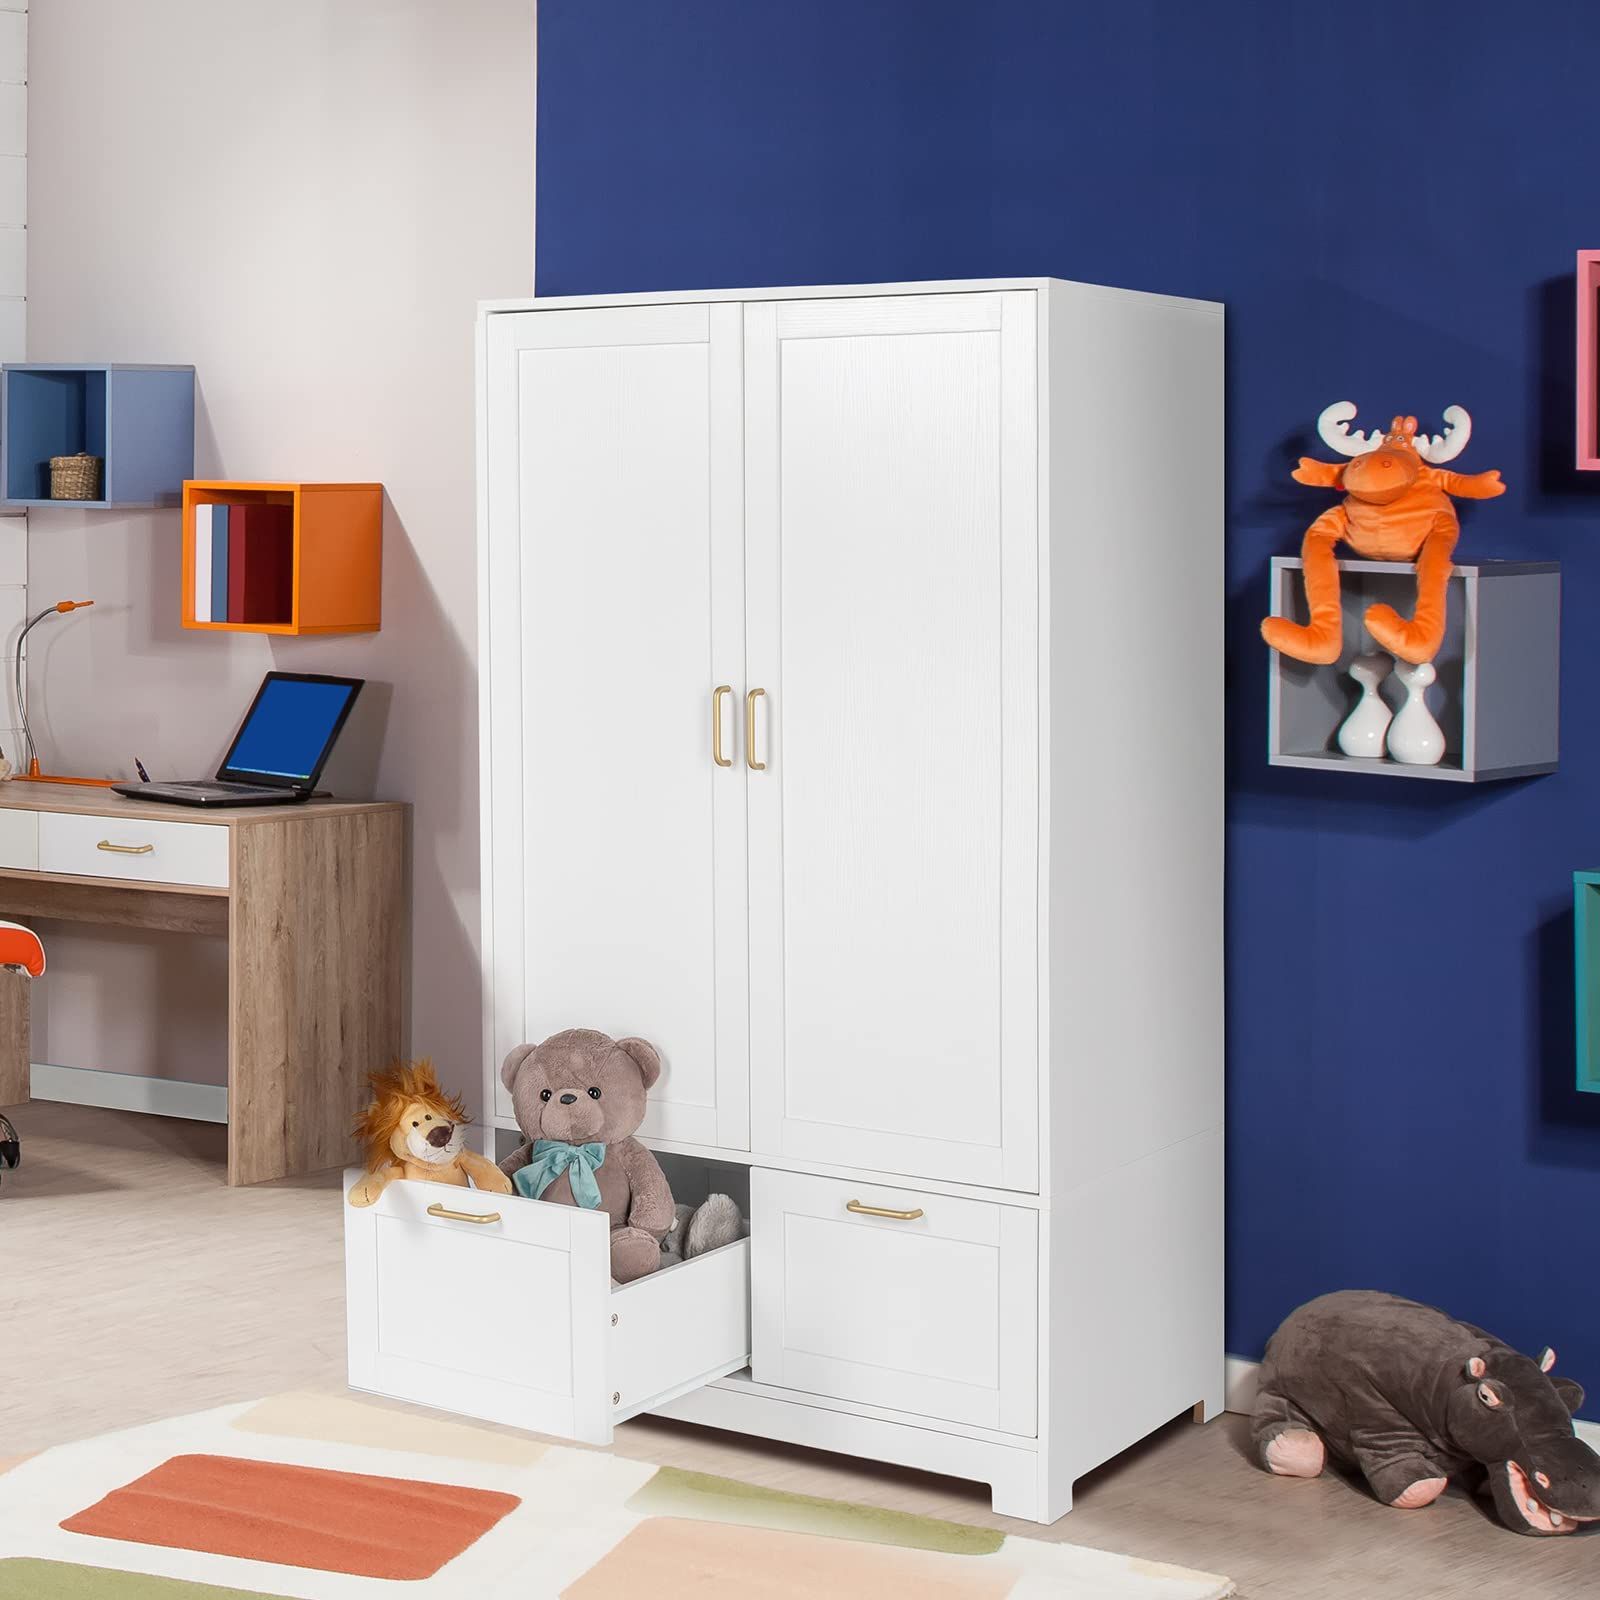 60 Inch Wardrobes Throughout Most Up To Date Amazon: Vingli Wide White Armoire Wardrobe Closet With Adjustable  Shelves And Drawers, 60" Freestanding Closet Wardrobe Cabinet, Armoires And  Wardrobes With Doors For Kids' Room, Dorm : Home & Kitchen (Photo 1 of 10)